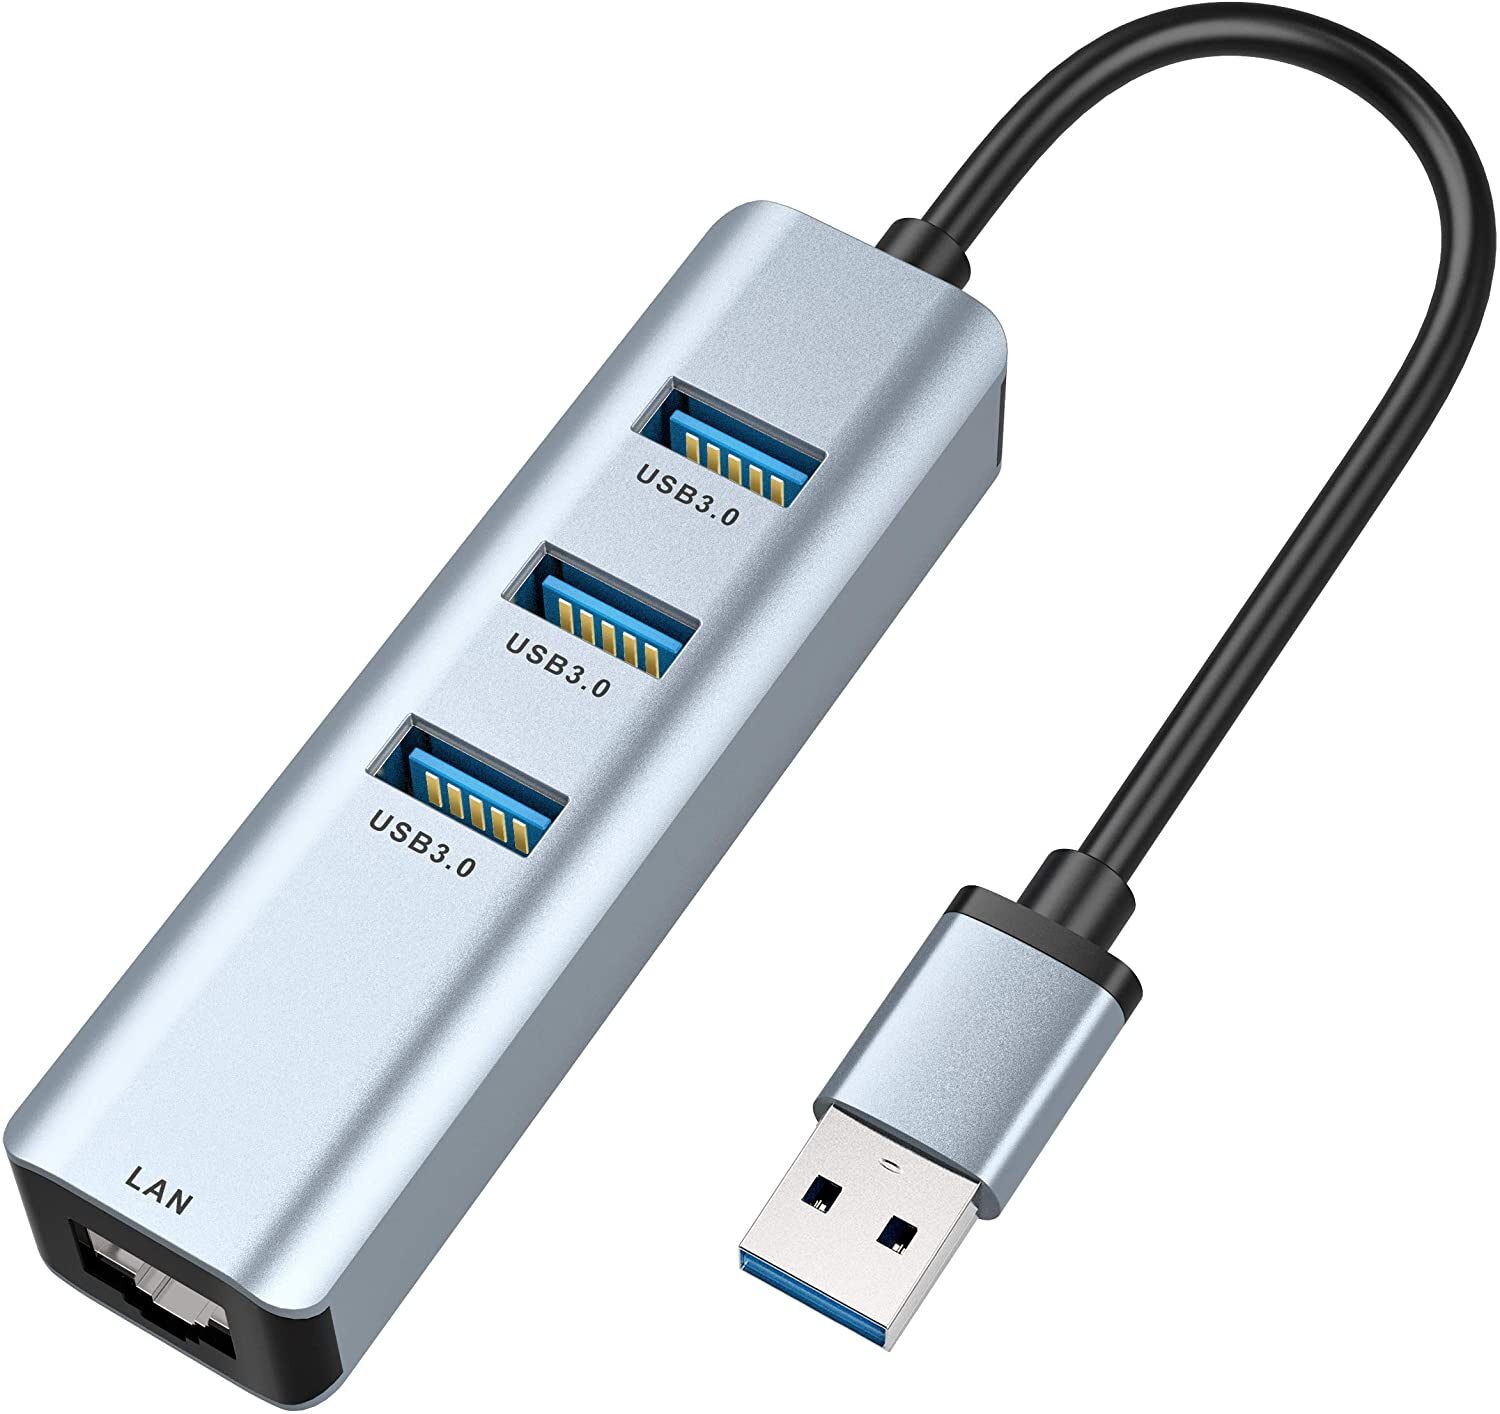 ablewe usb to hdmi driver download